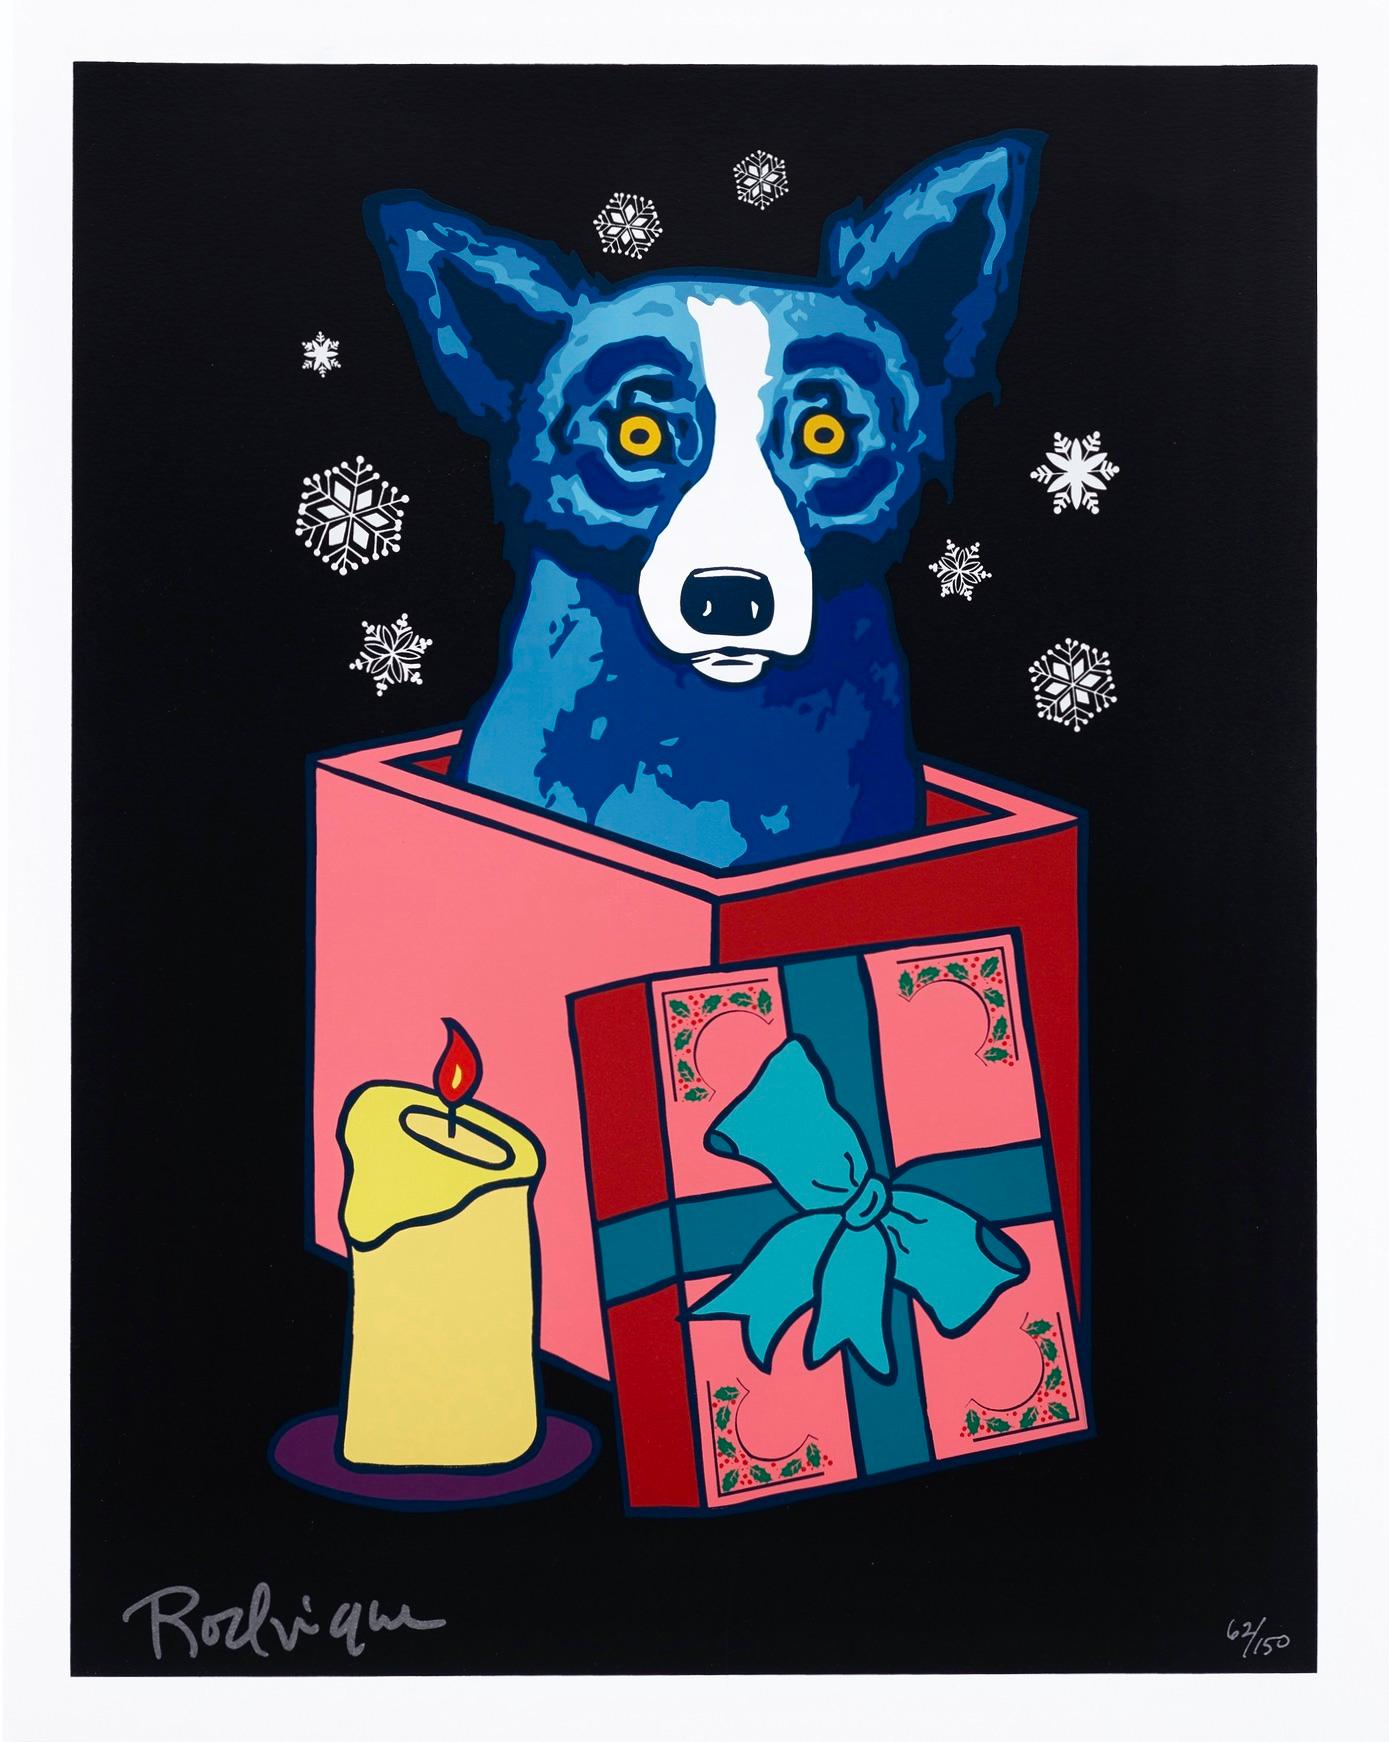 Artist: George Rodrigue (1944-2013)
Title: Midnight Surprise (Blue Dog Series)
Year: 2000
Edition: 62/150, plus proofs
Medium: Silkscreen on archival paper
Size: 22 x 17.5 inches
Condition: Excellent
Inscription: Signed and numbered by the